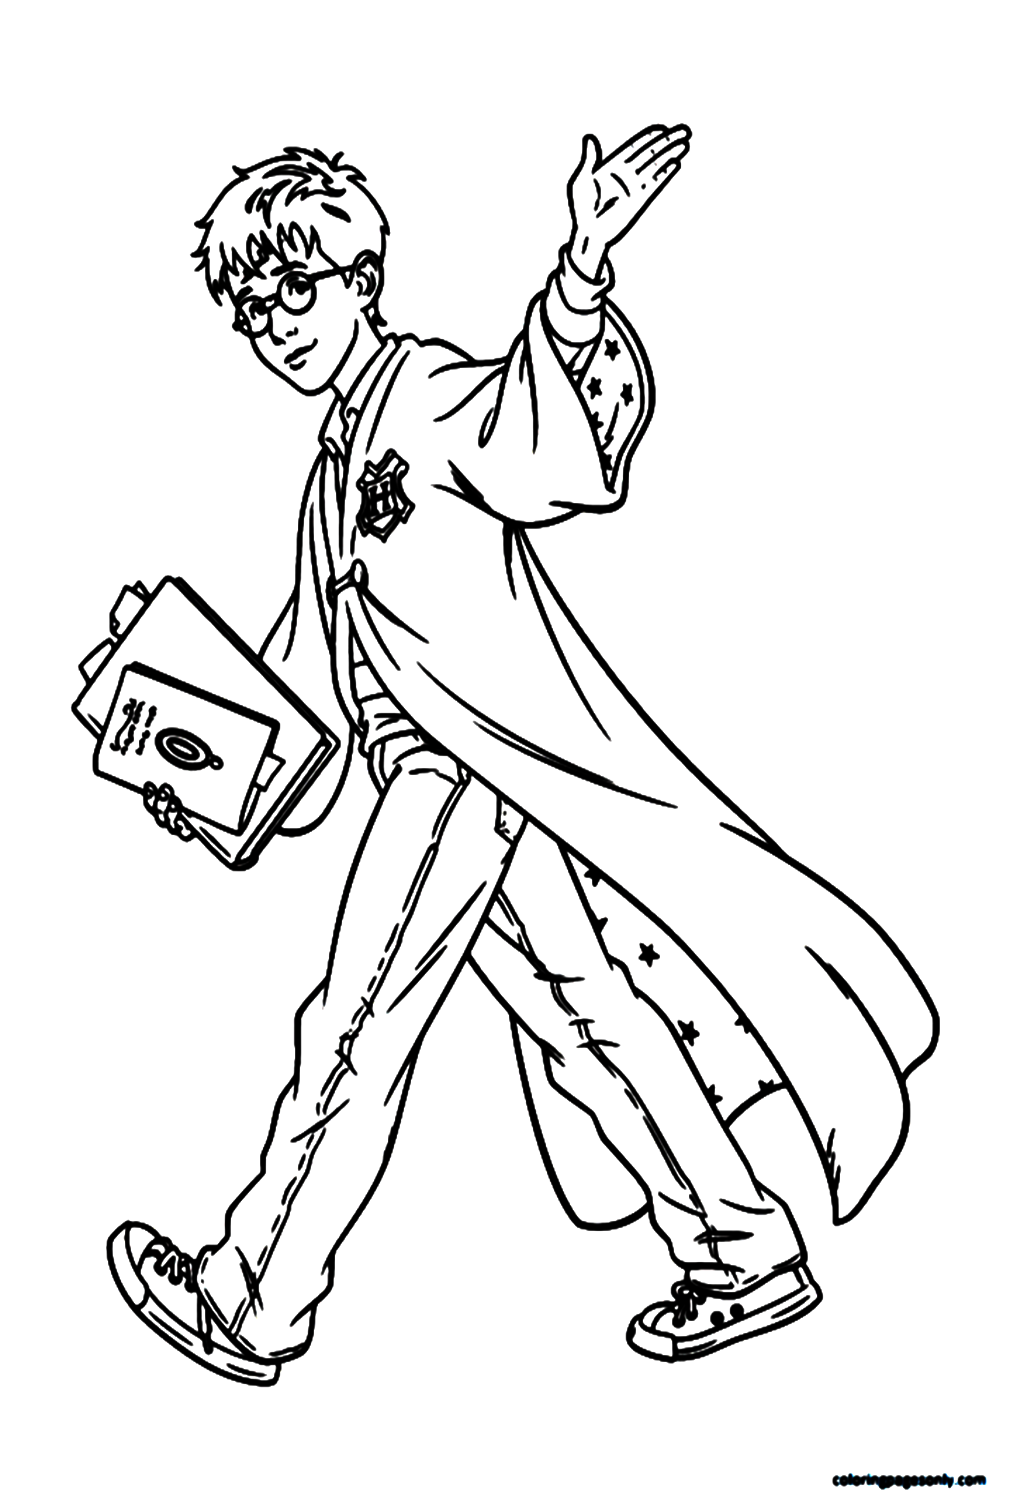 Young Harry Potter at School Coloring Pages